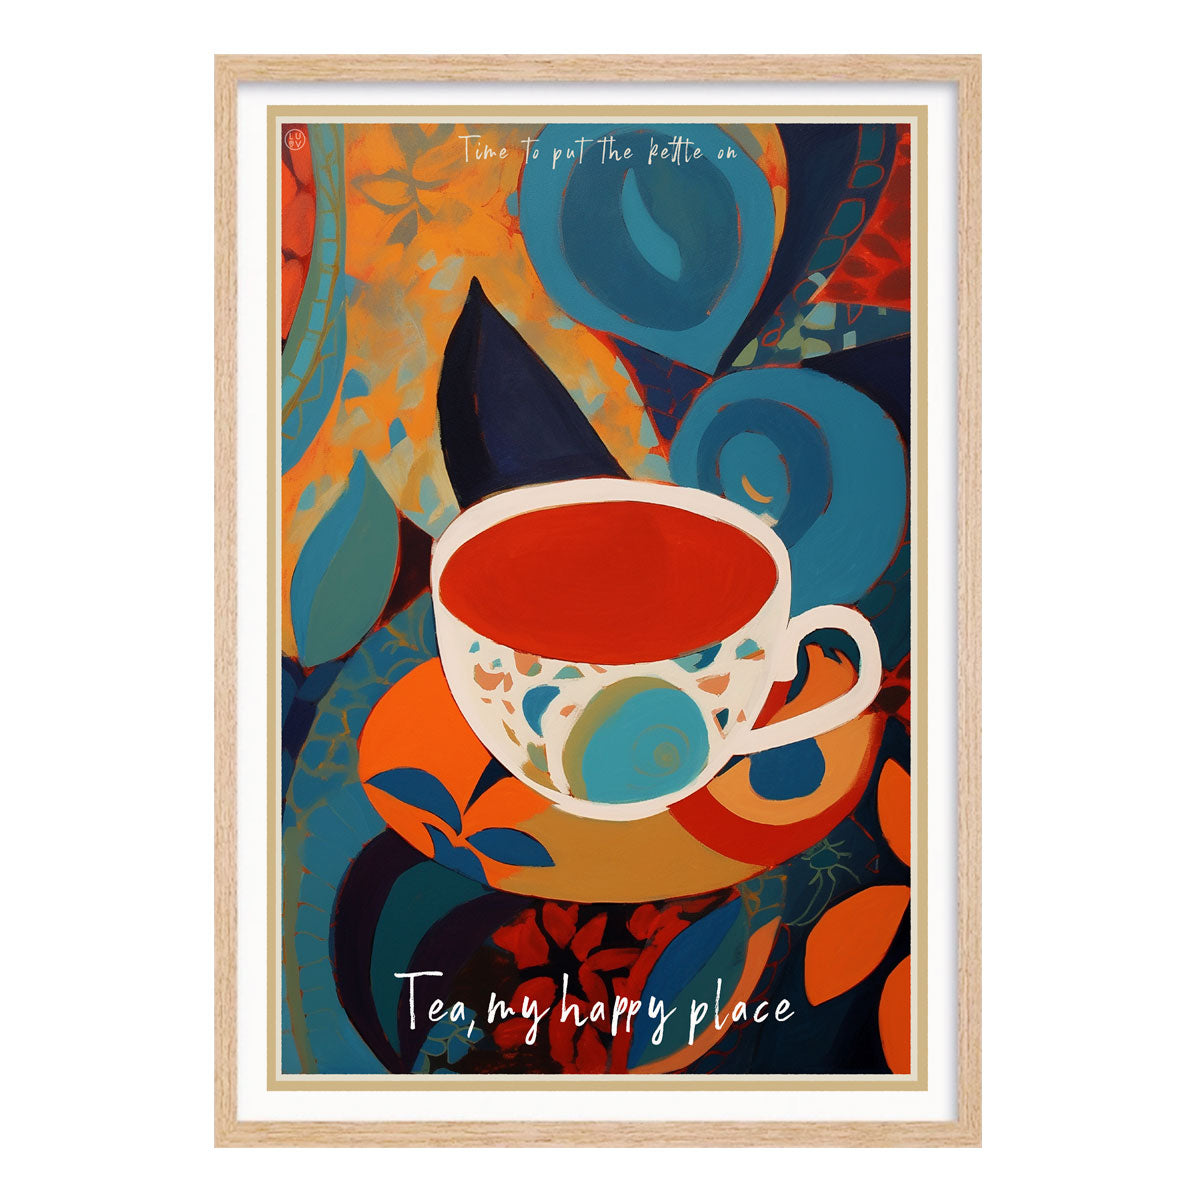 English Tea retro vintage poster print in oak frame from Places We Luv